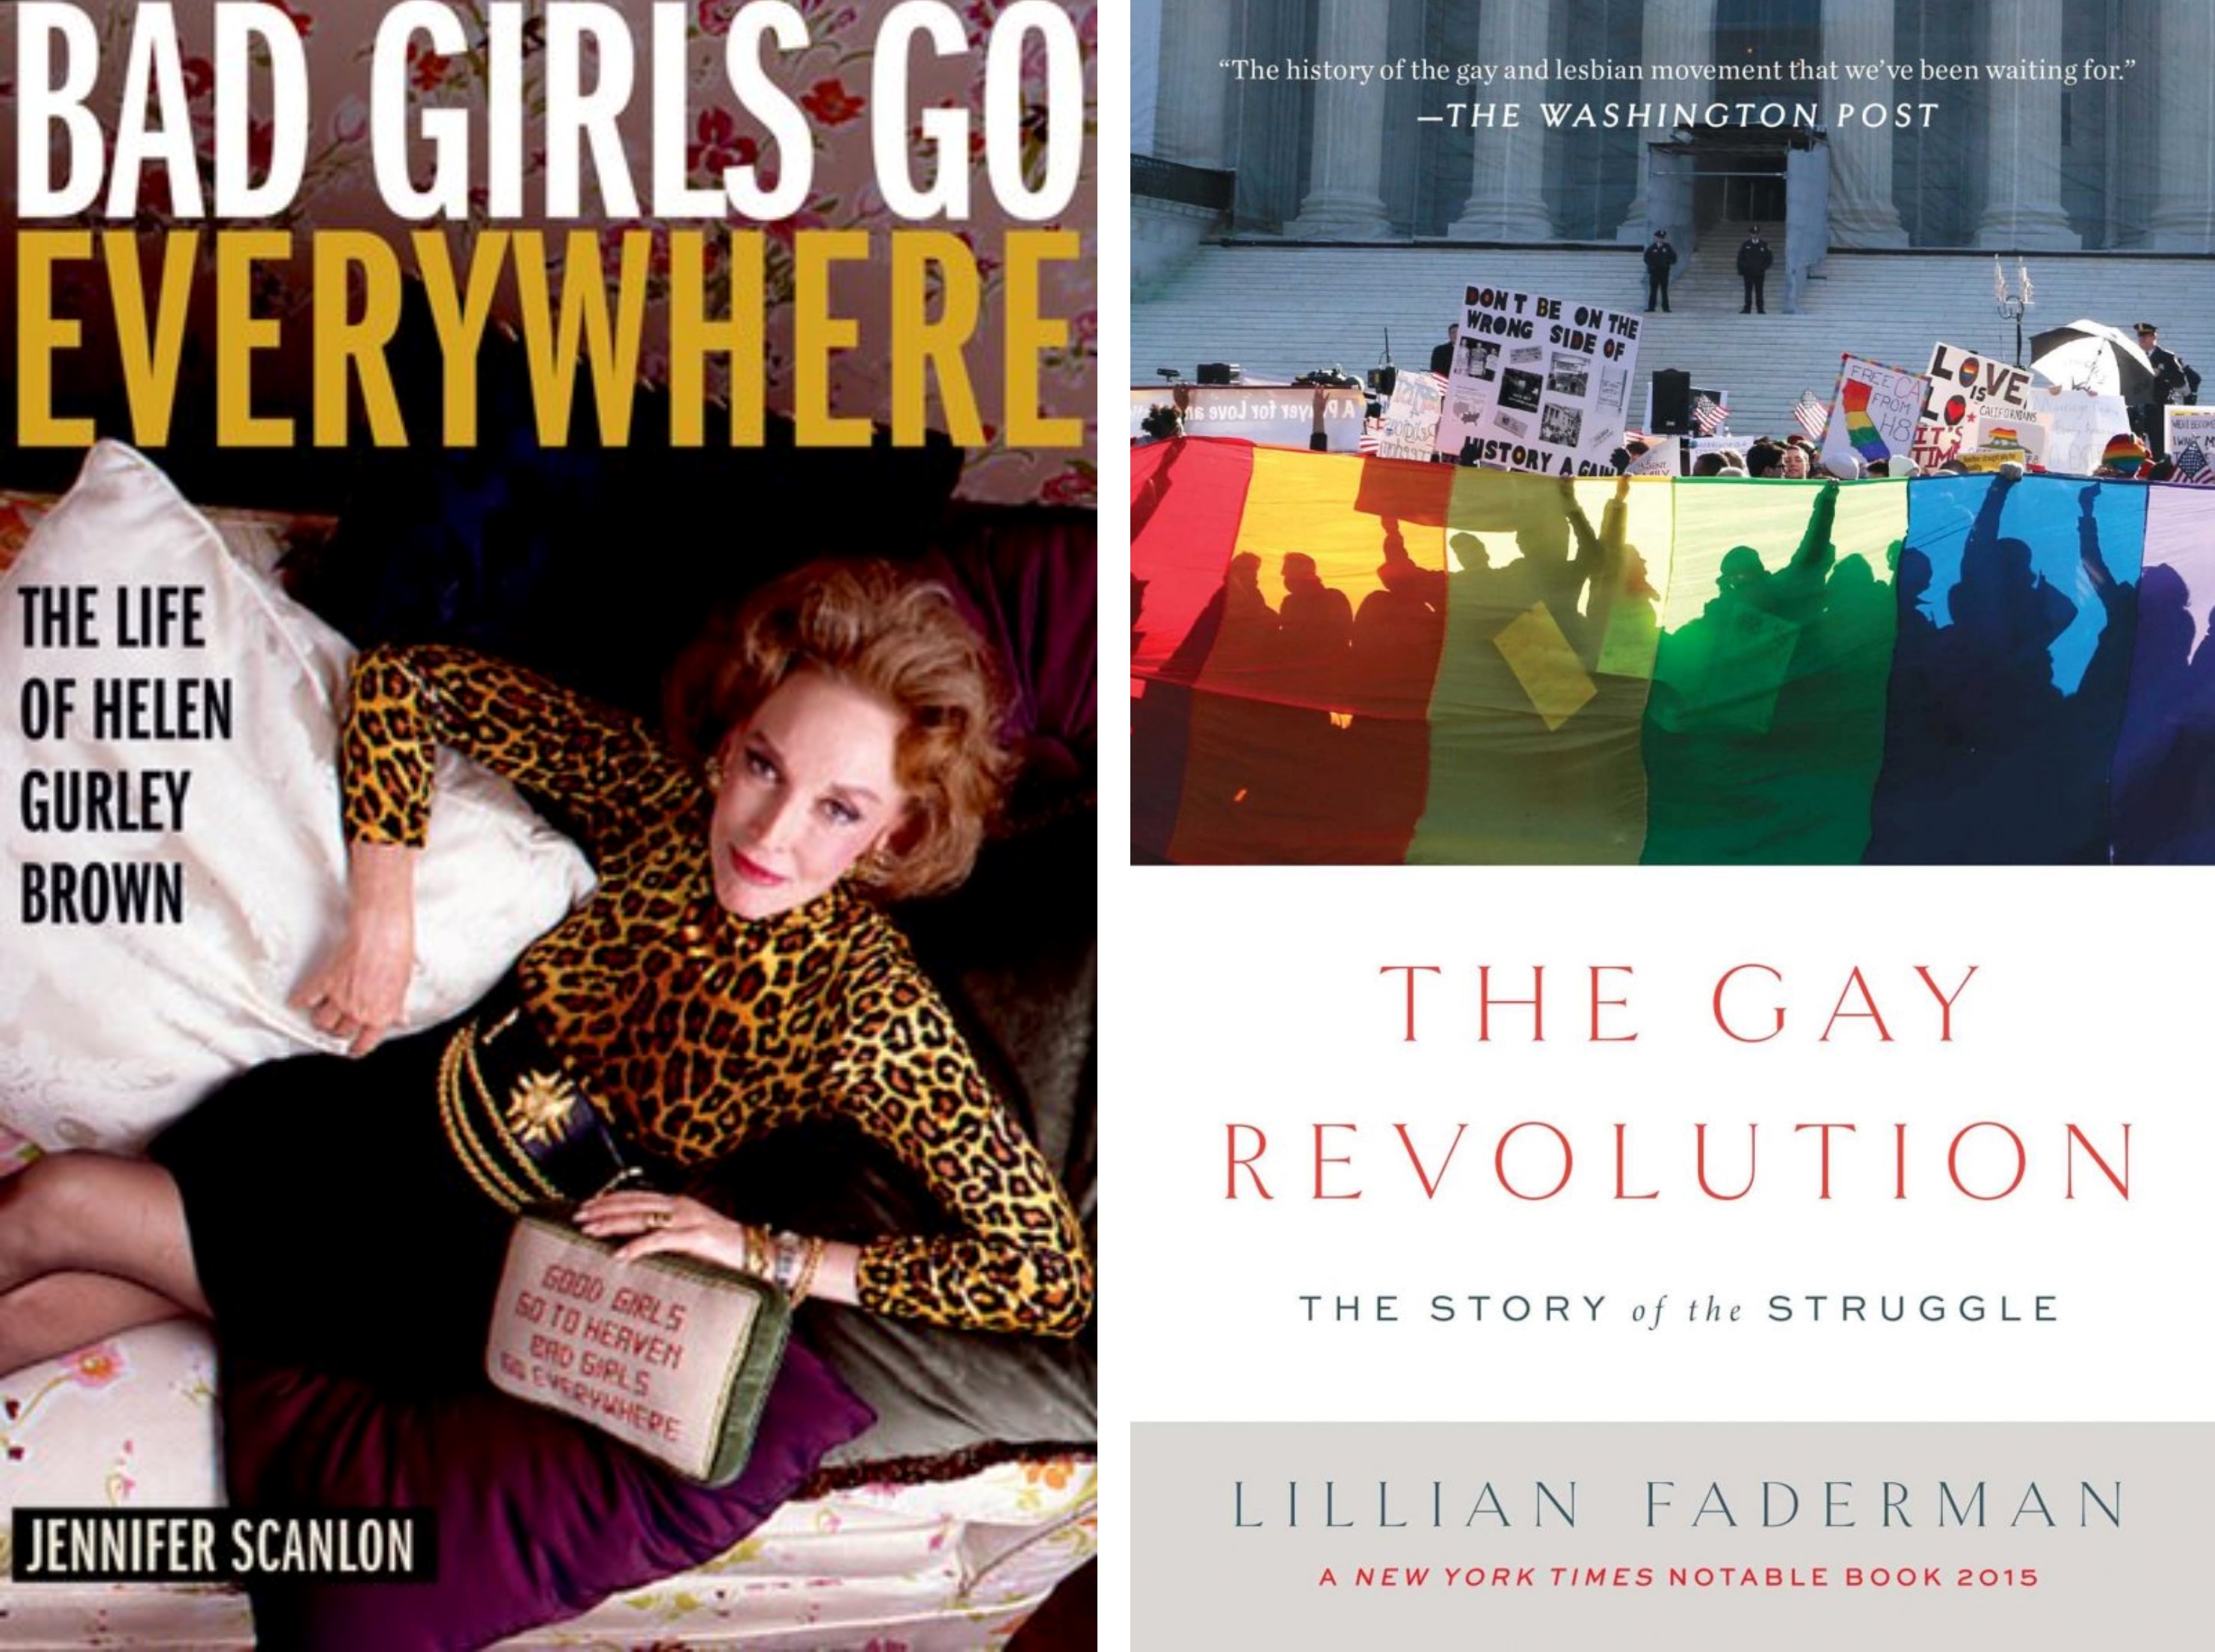 On the left, the cover of 'Bad Girls Go Everywhere.' On the right, the cover of 'The Gay Revolution.'